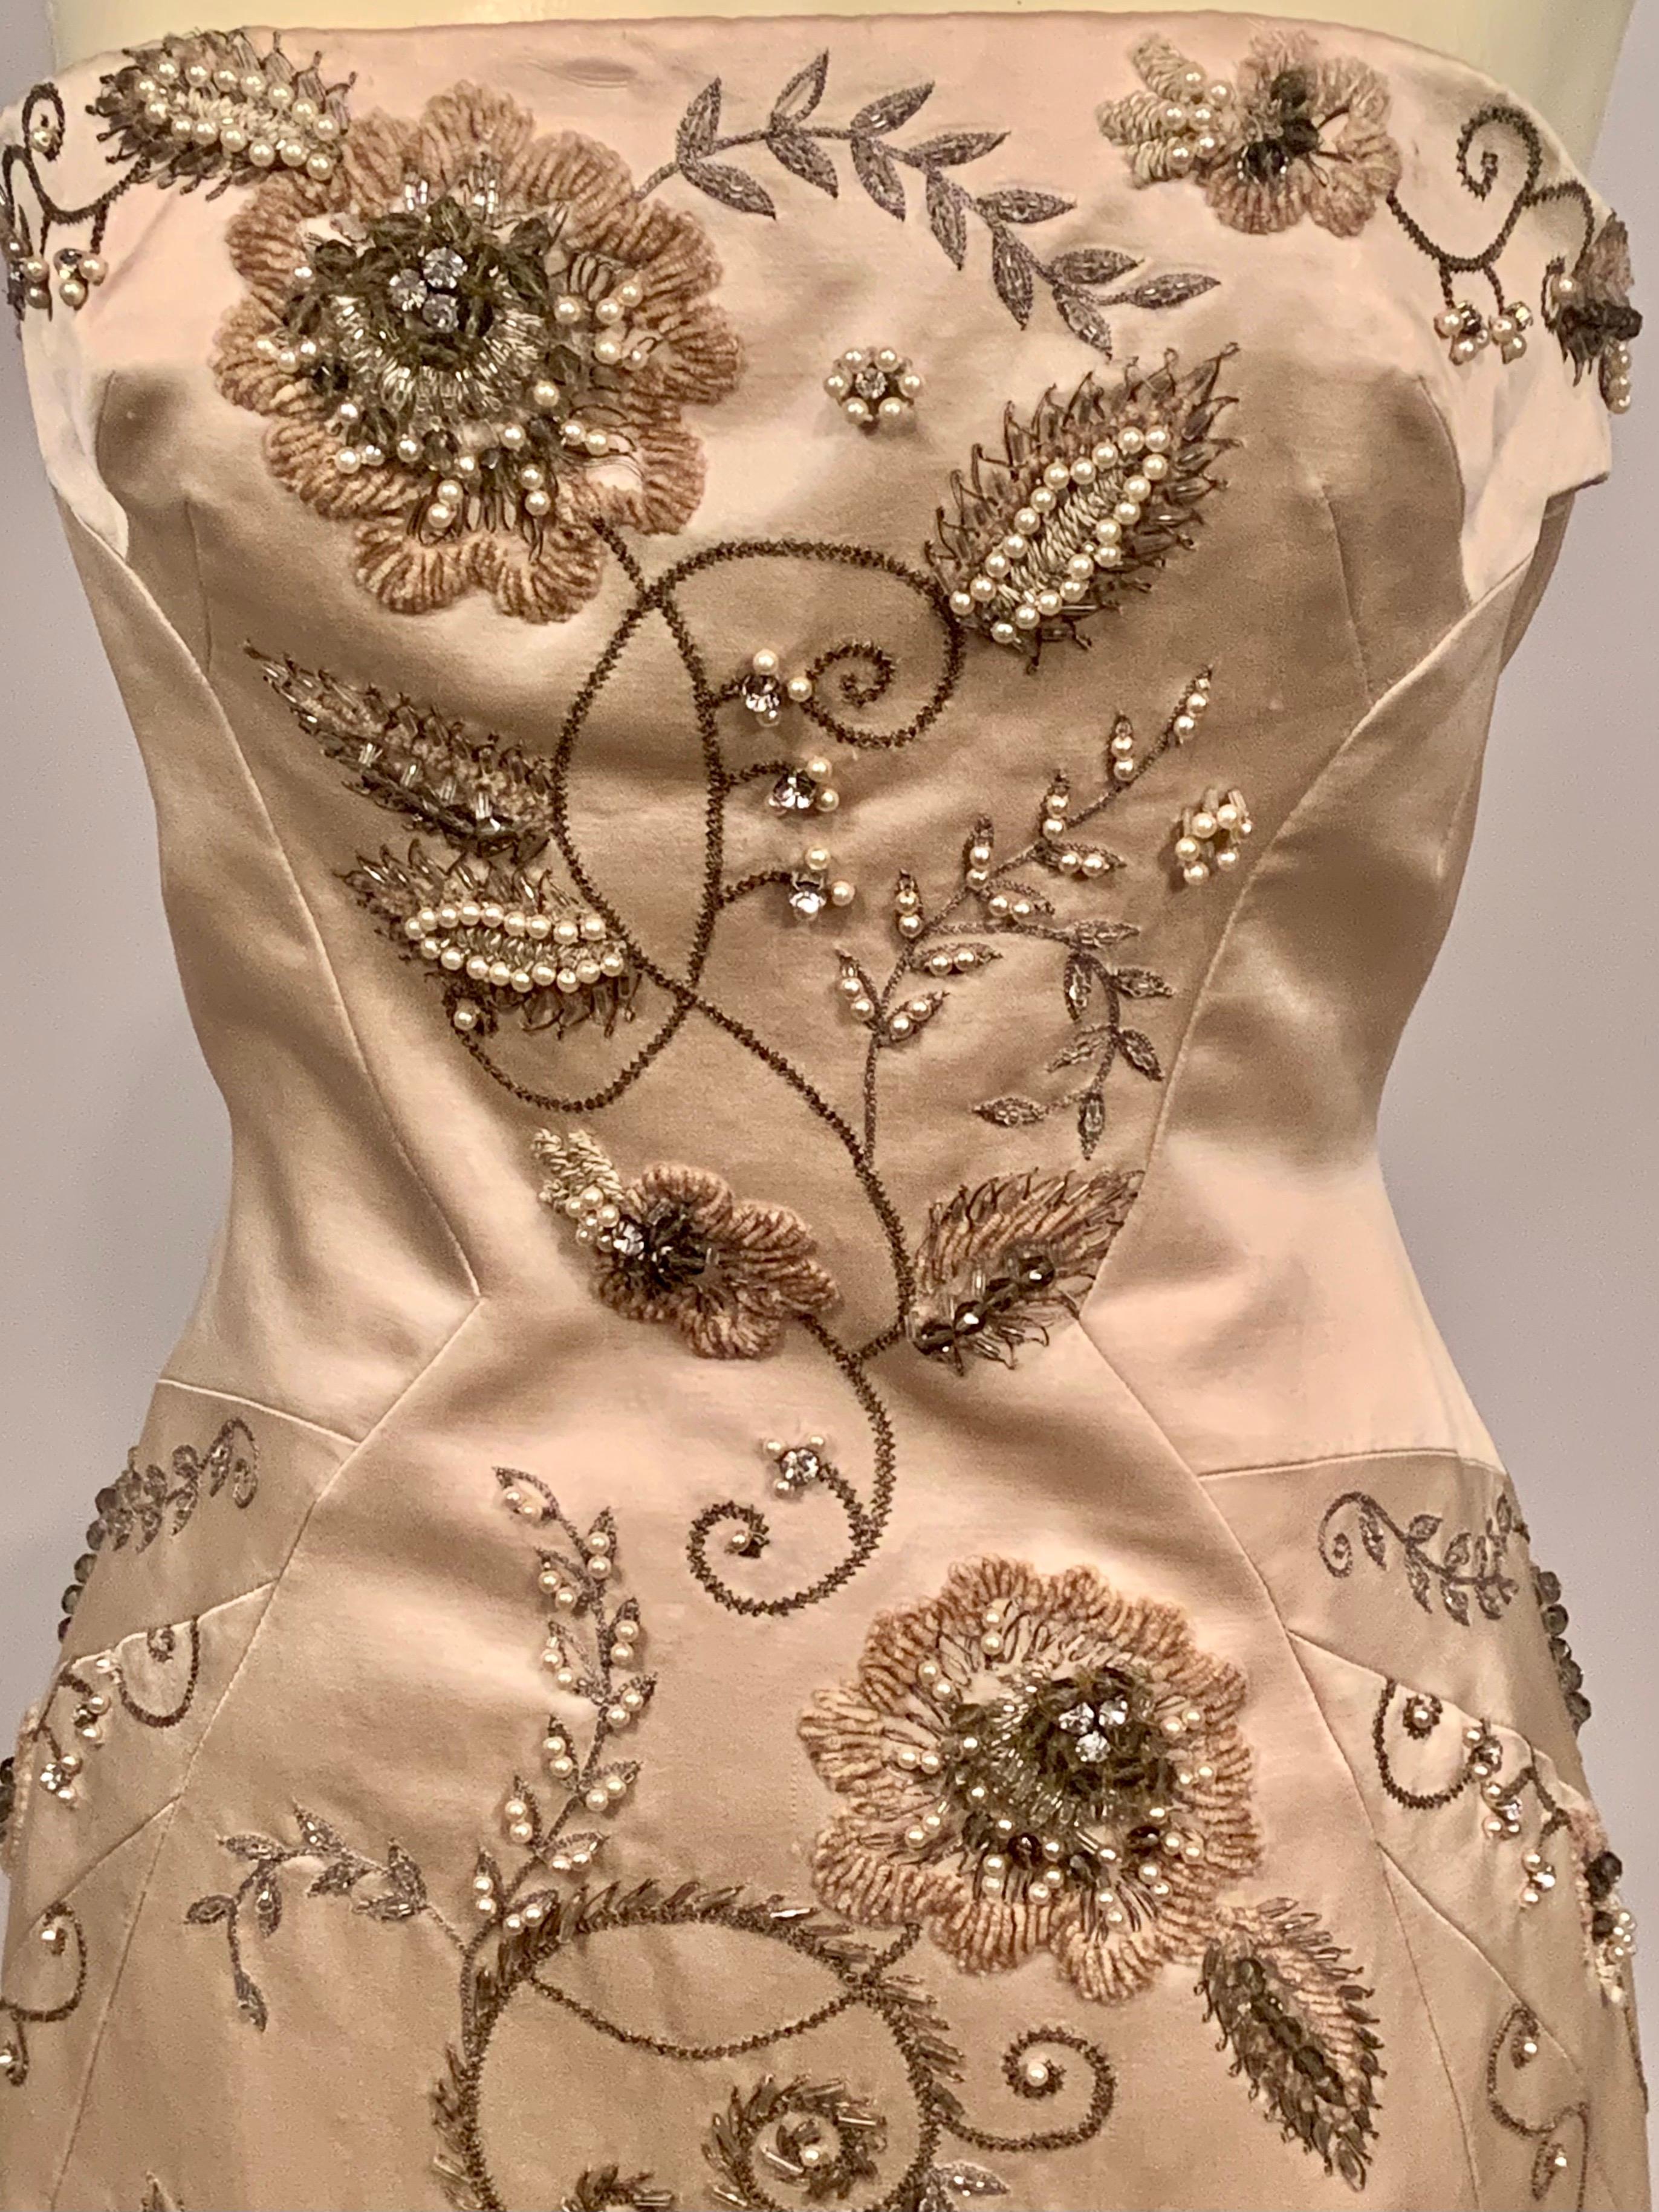 This is such a beautiful champagne colored strapless gown with a train, designed by Maggie Norris, the former Senior Design Director of Womenswear at Ralph Lauren.  The dress has a beaded band at the bustline and the design of flowers, vines and